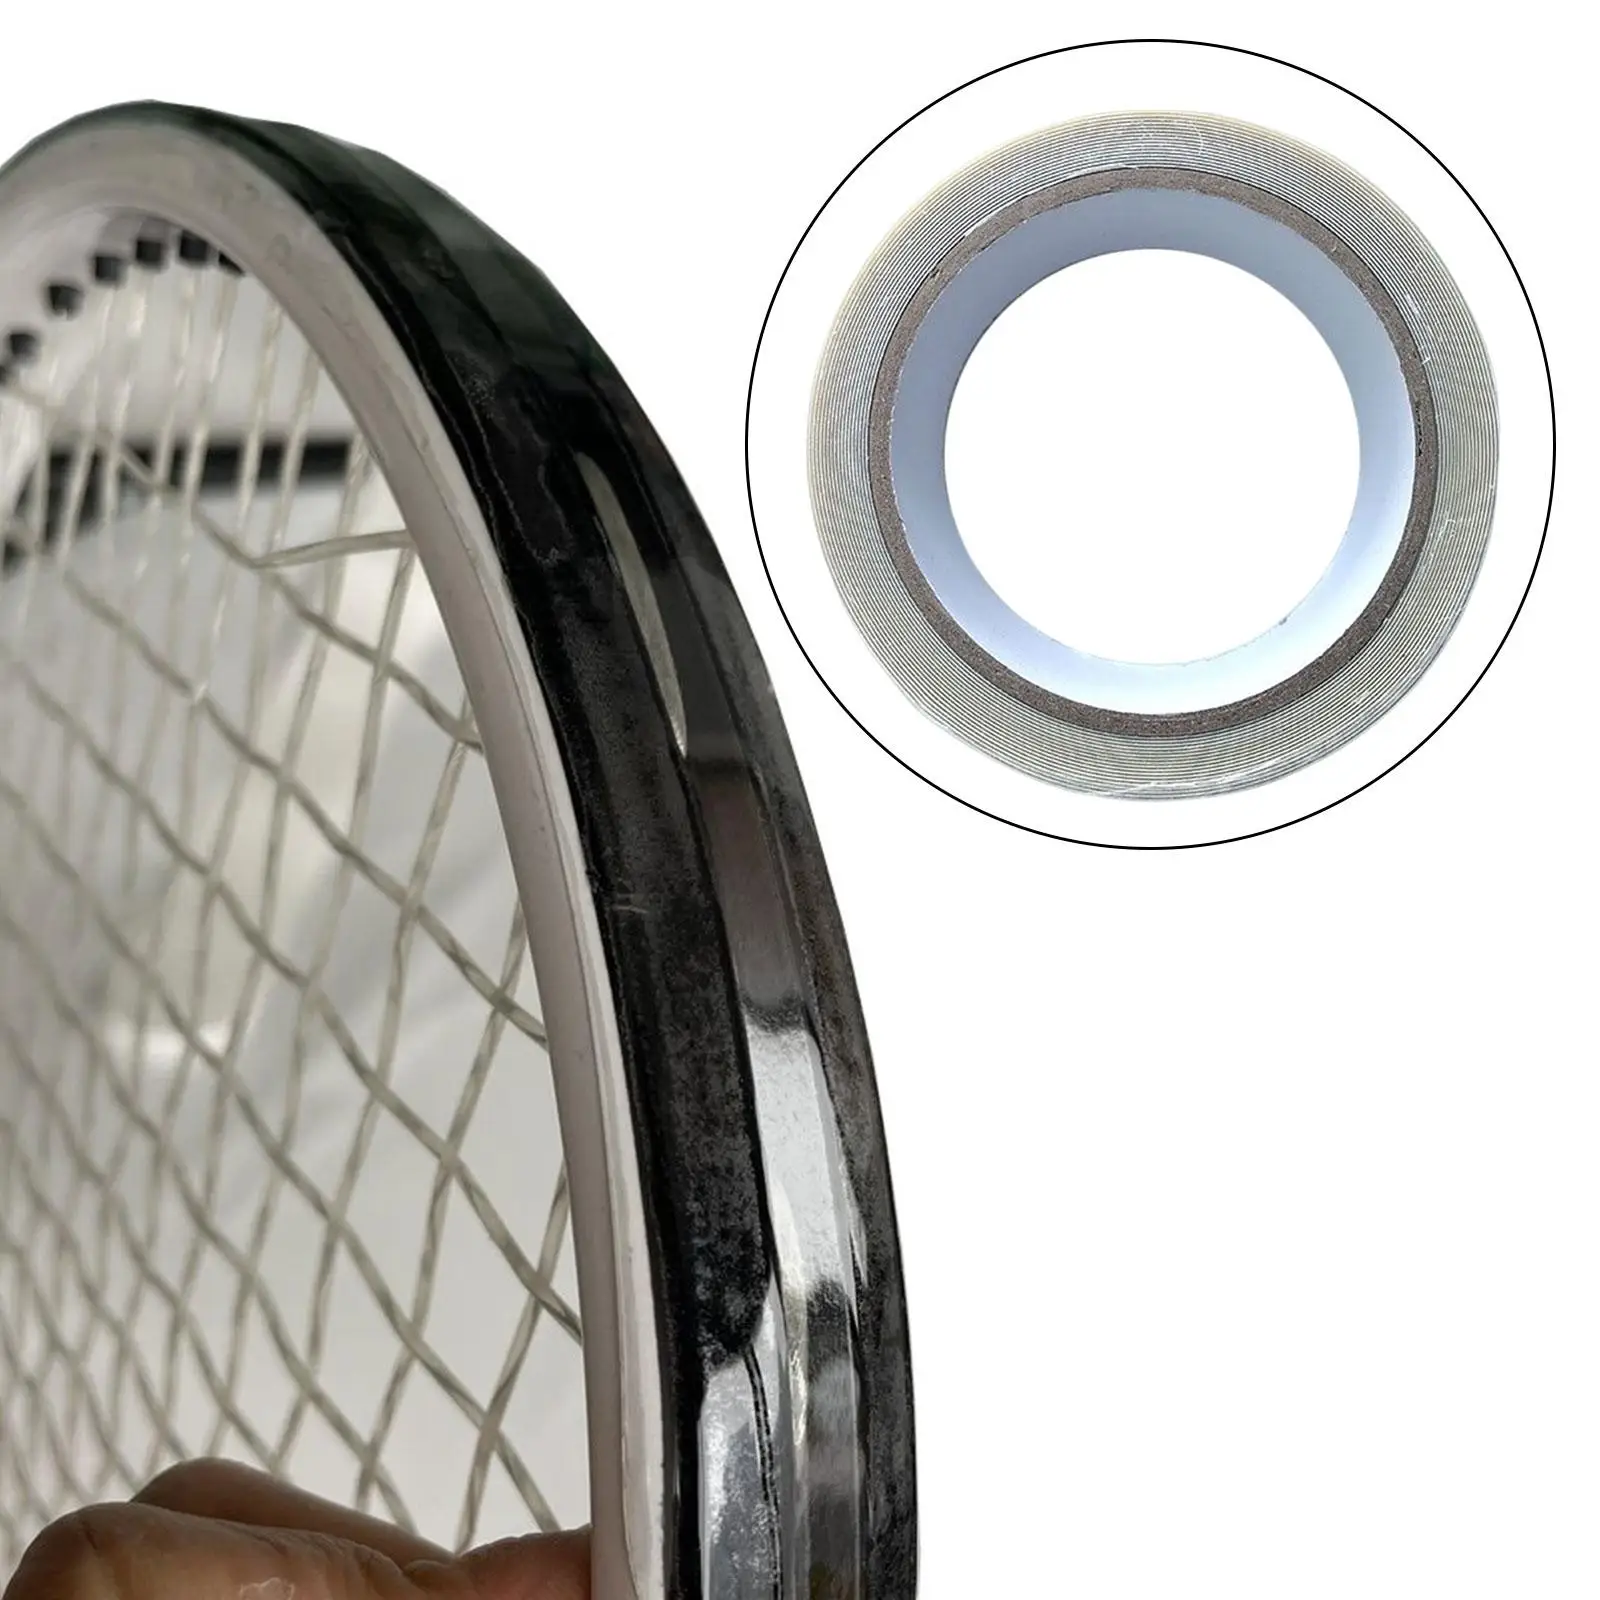 Racket Protection Tape Stickers Impact Decrease Transparent, Width 3.5cm Wrap ,Guard Tape for Sports Gear Beach